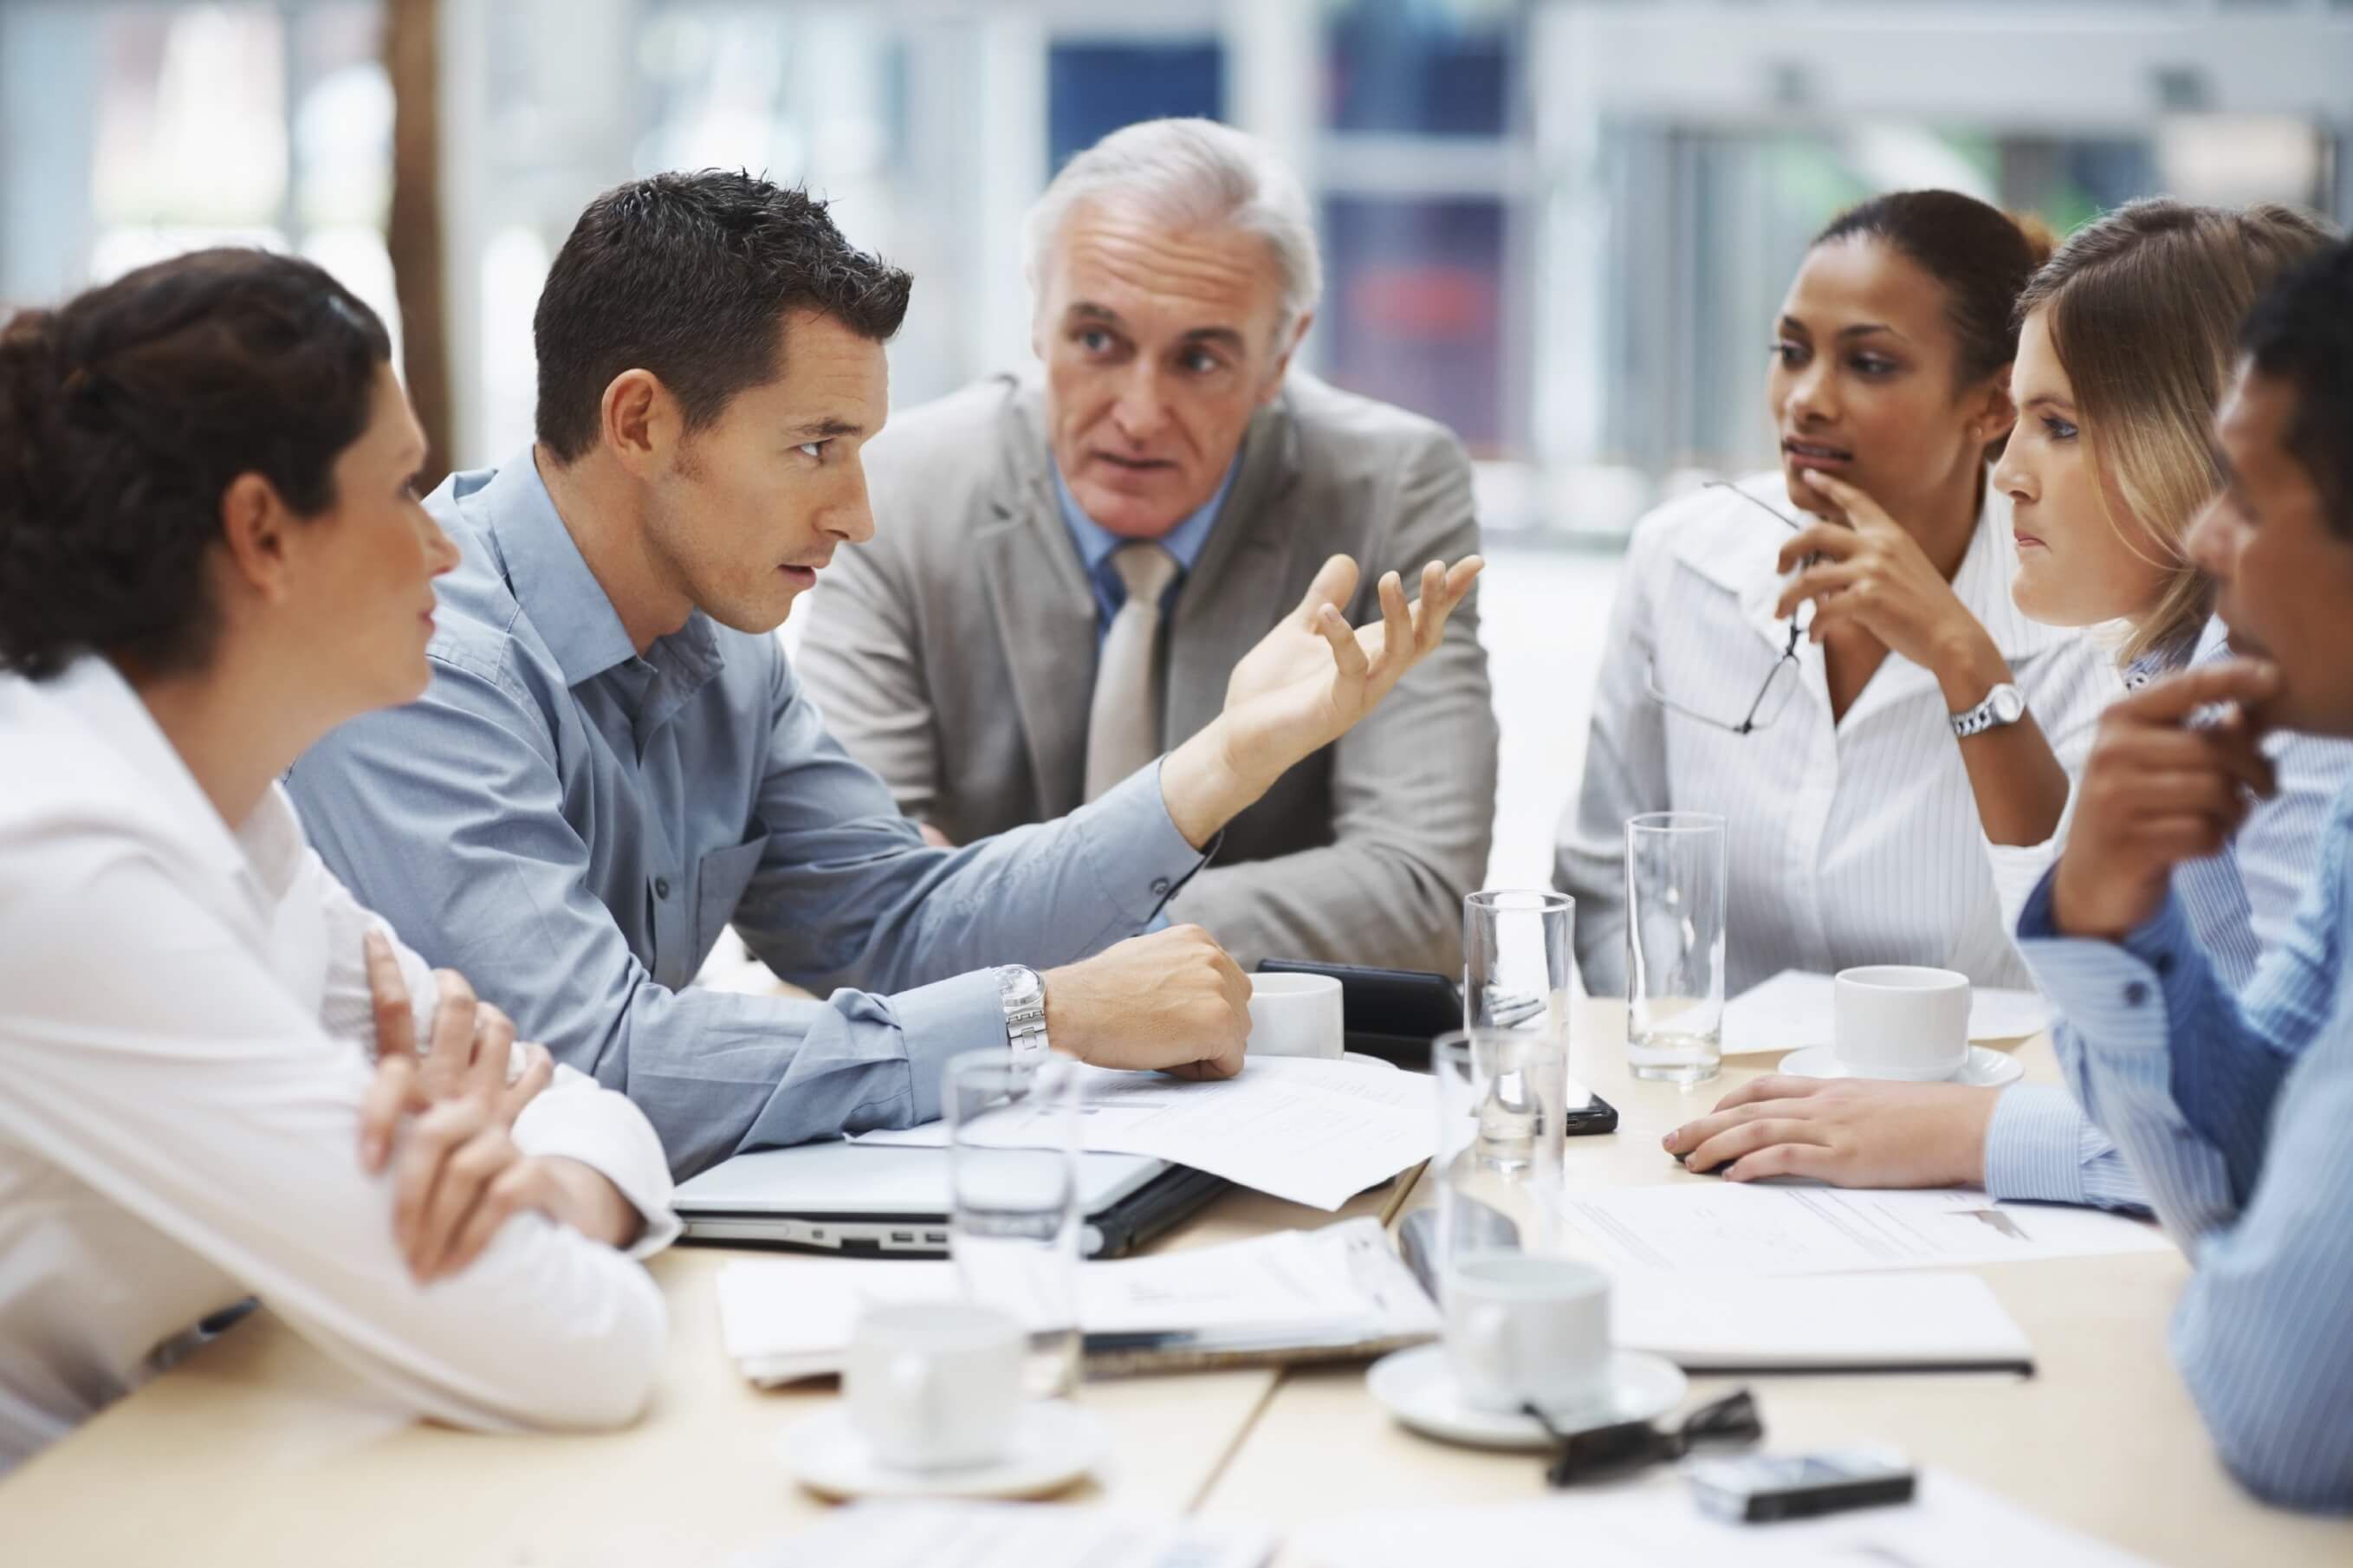 A stock photo of six people huddled around a table in a discussion